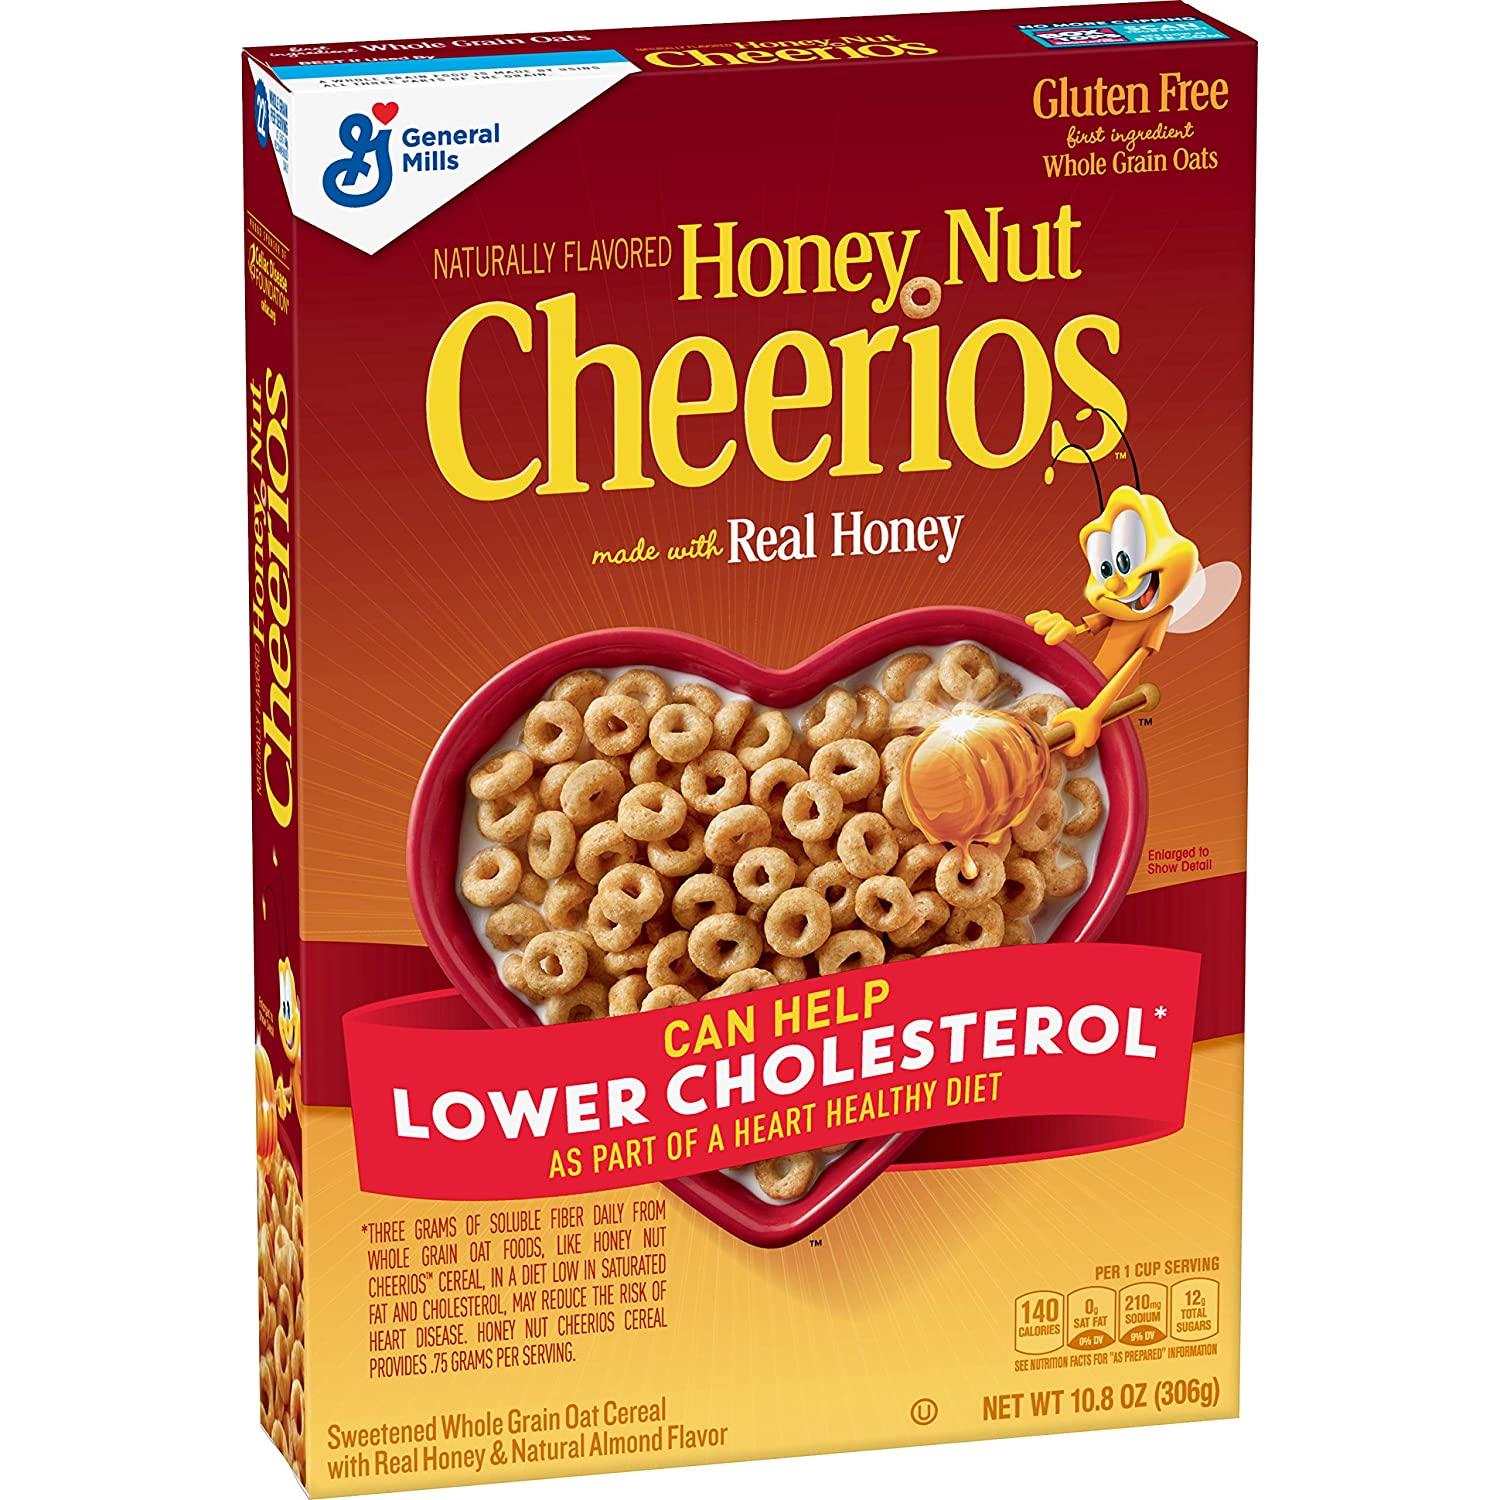 Honey Nut Cheerios Cereal for $1.89 Shipped